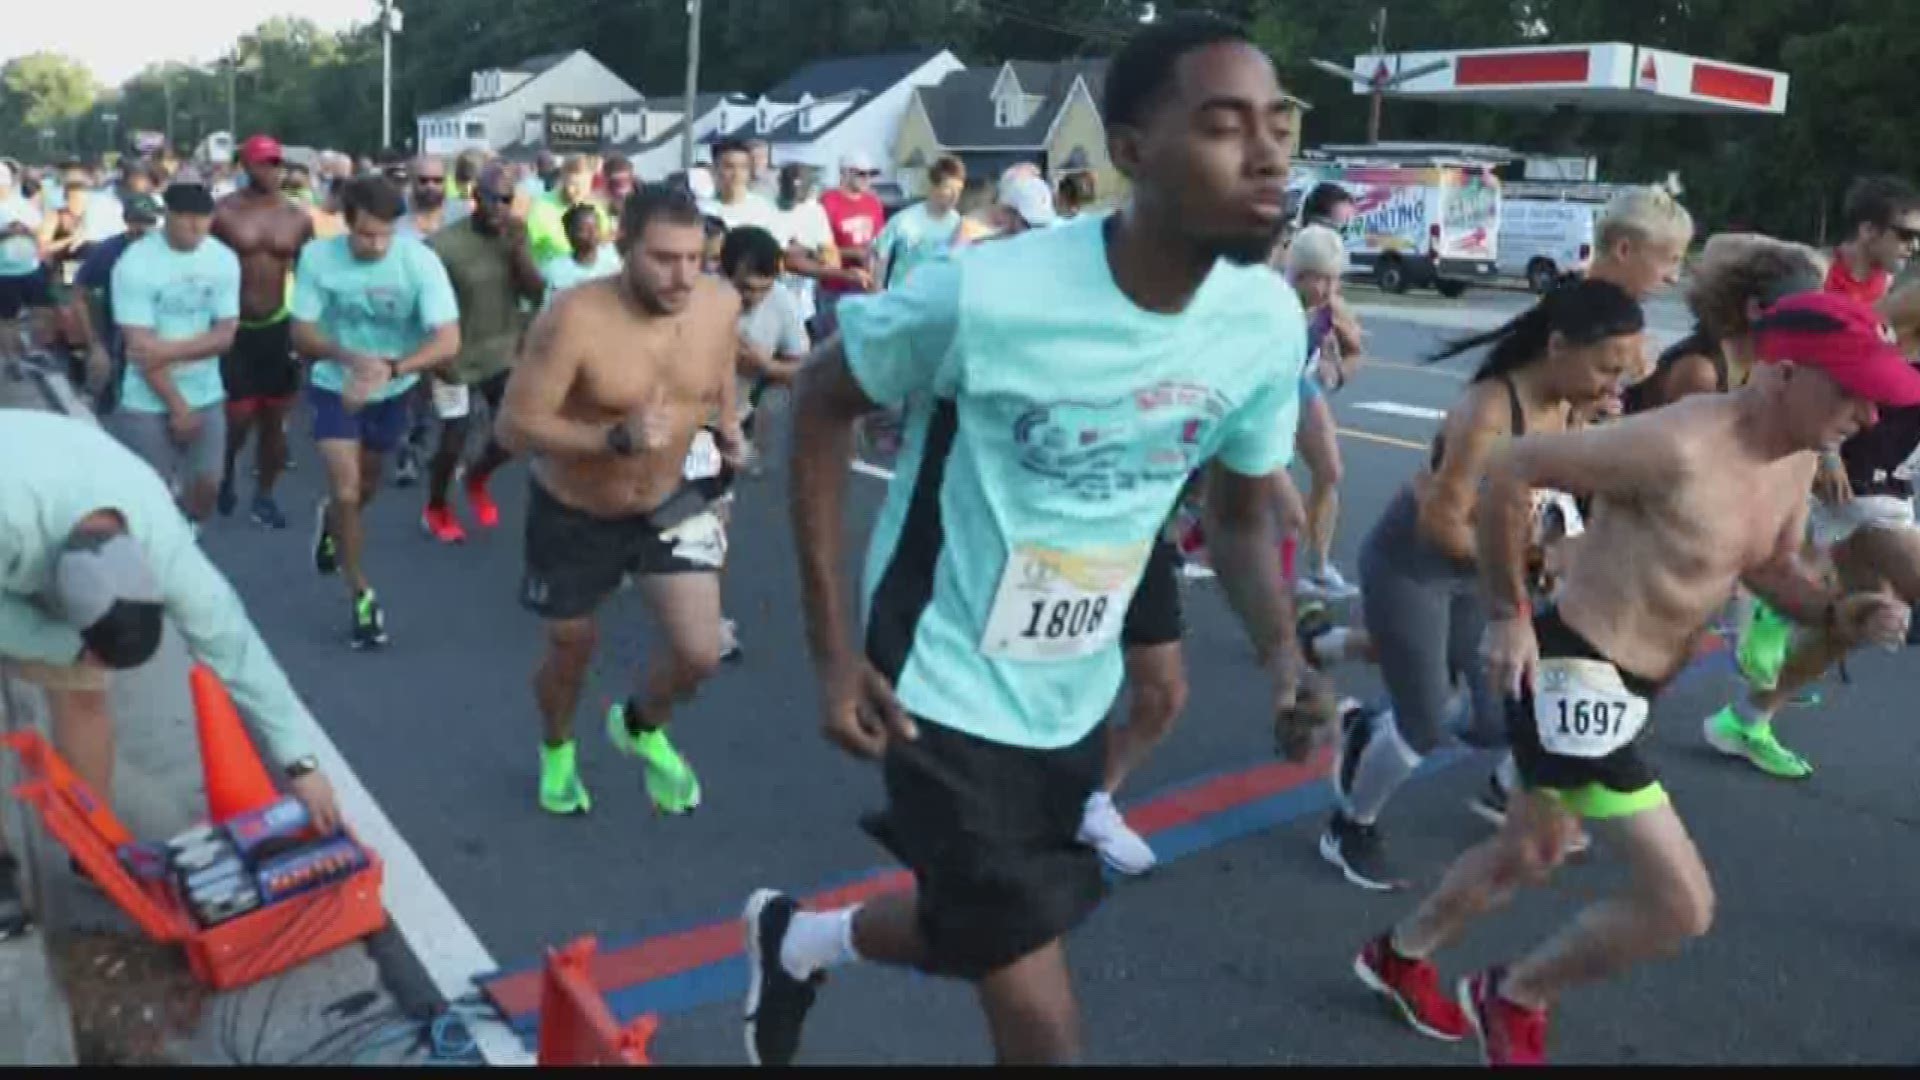 While some people used their Labor Day holiday to sleep in, over 1,000 people were up early getting ready to run the 43rd Annual Macon Labor Day Road Race.